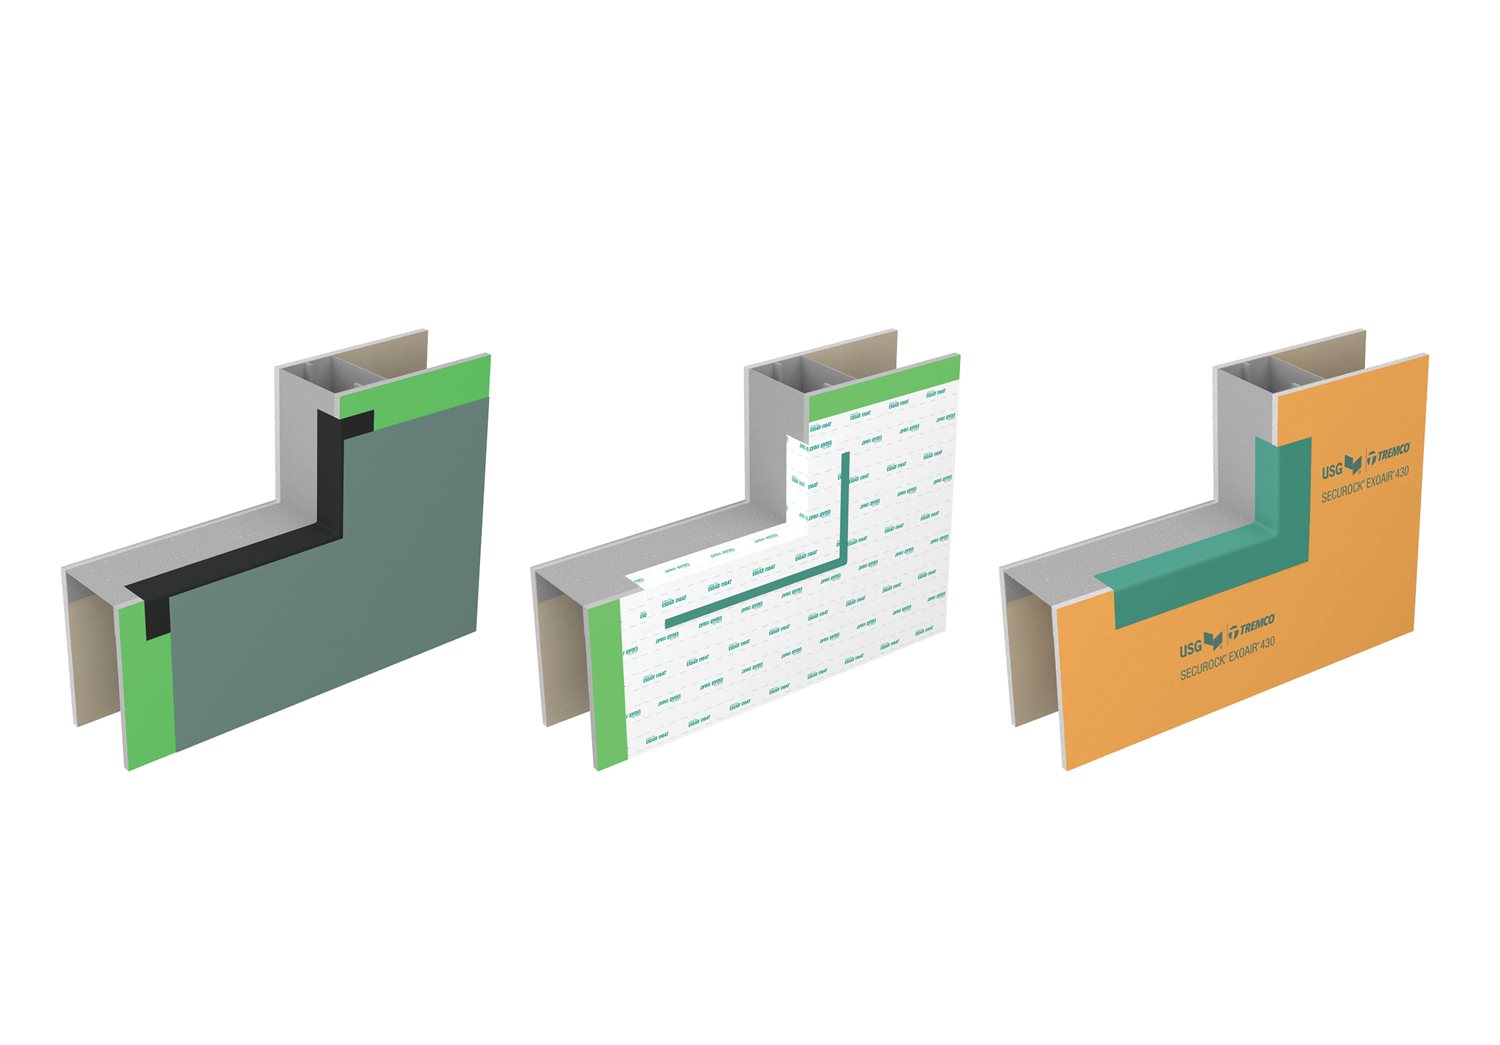 Three 3D renders of exterior wall systems with sheathing and air barriers